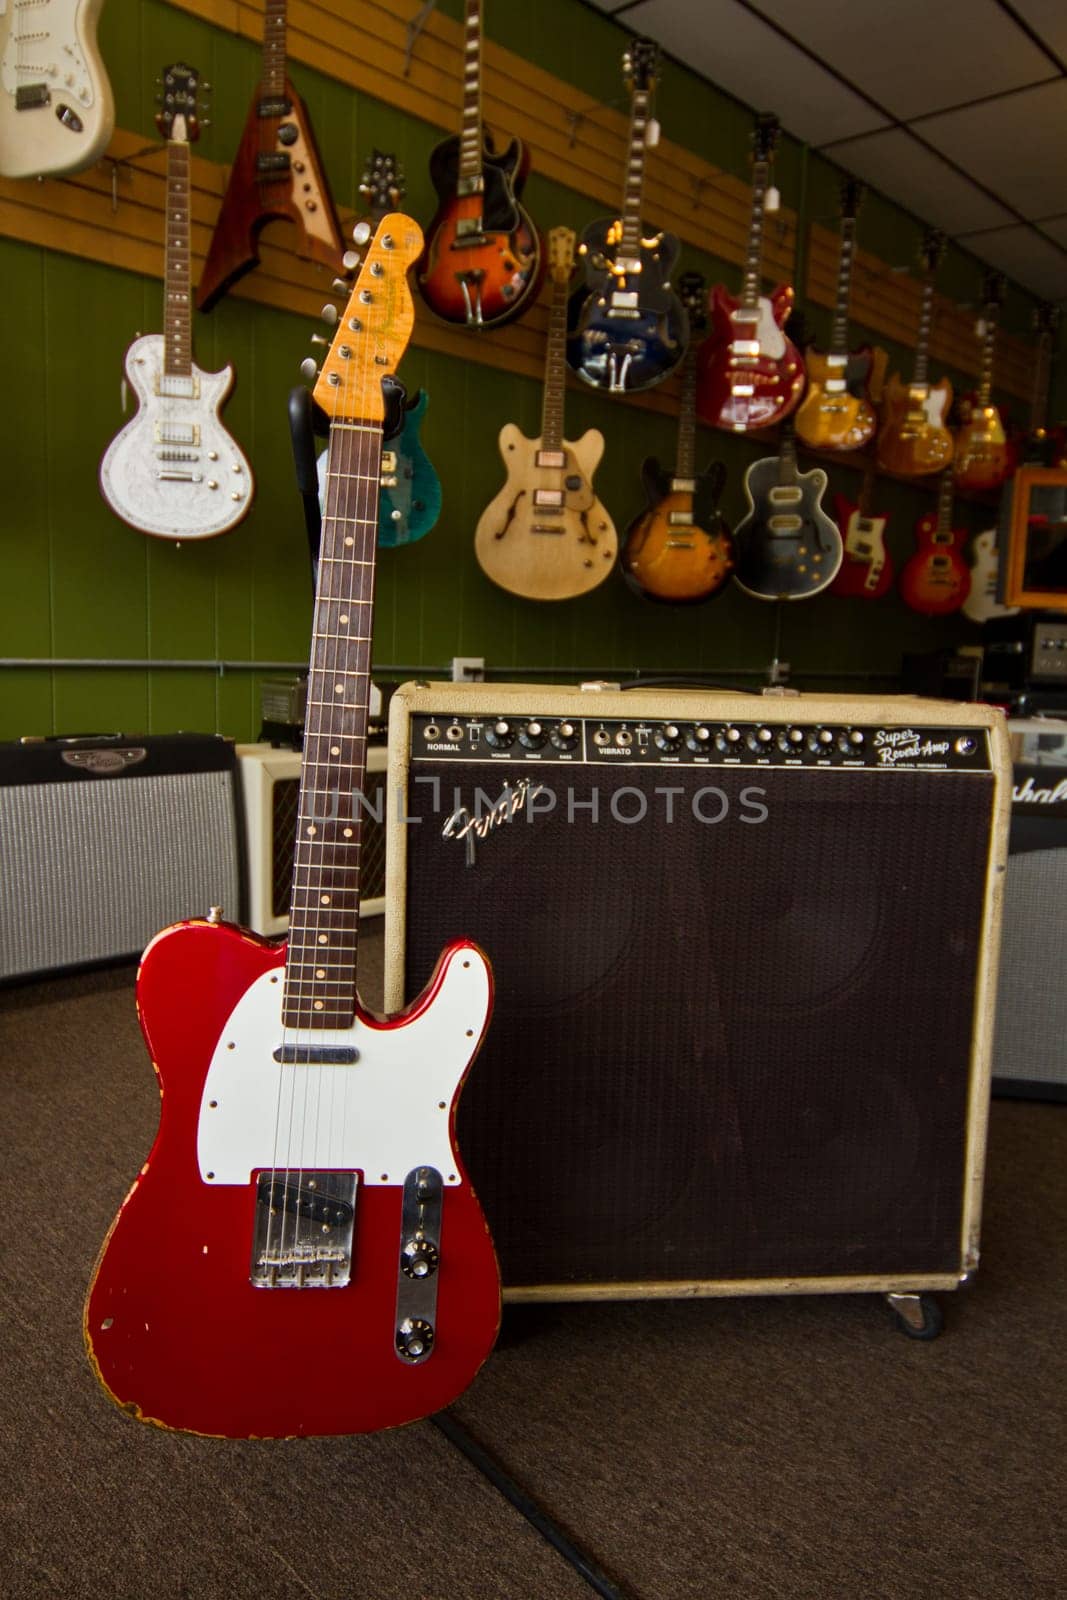 Vibrant Red Electric Guitar and Vintage Amplifier in Music Store - Fort Wayne, Indiana